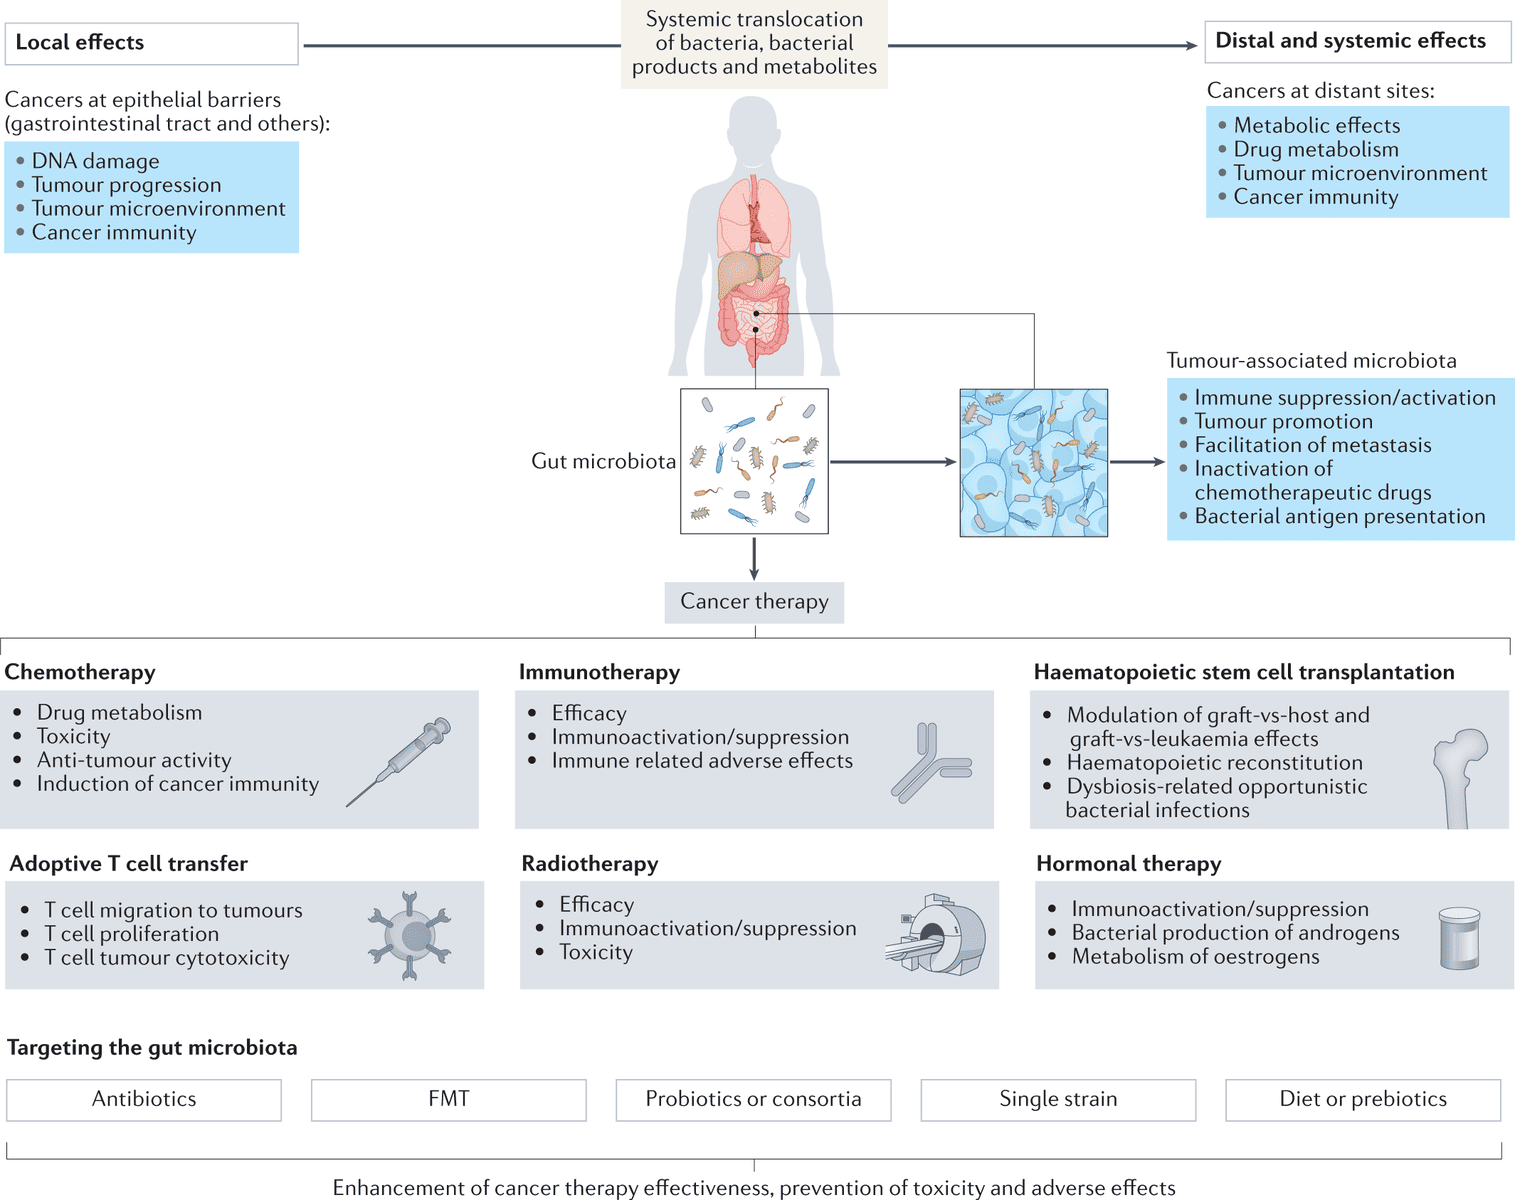 Targeting the Gut Microbiome for Therapeutic Interventions